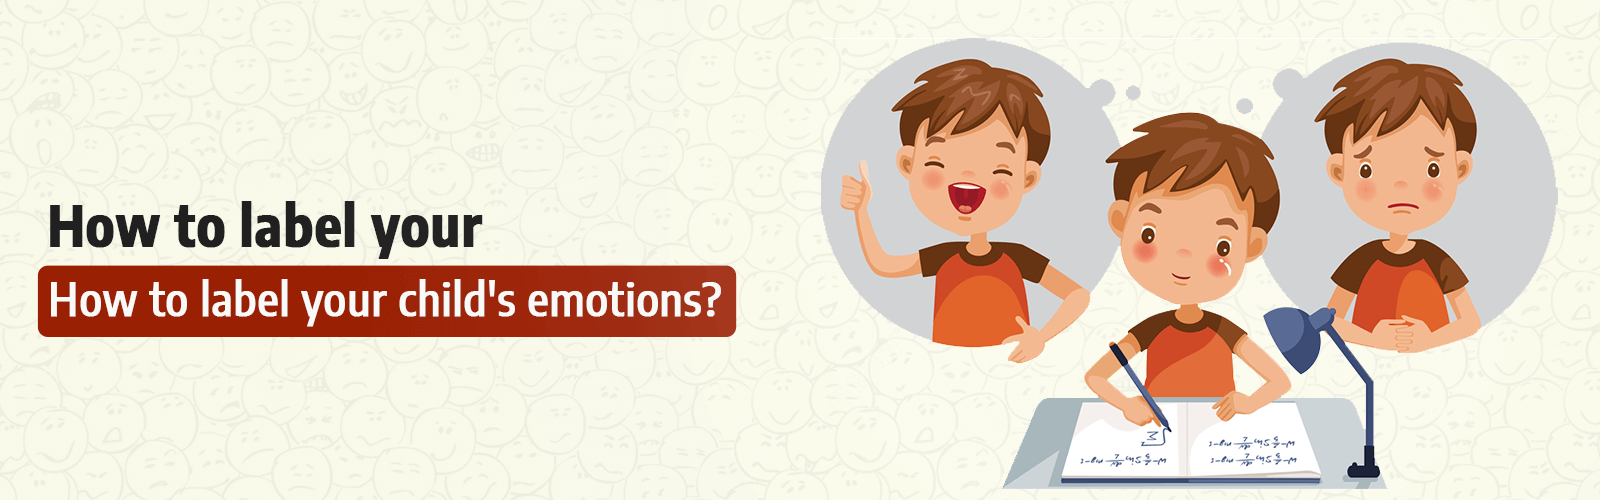 How to label your child’s emotions - CGR International School - Best School in Madhapur / Hyderabad